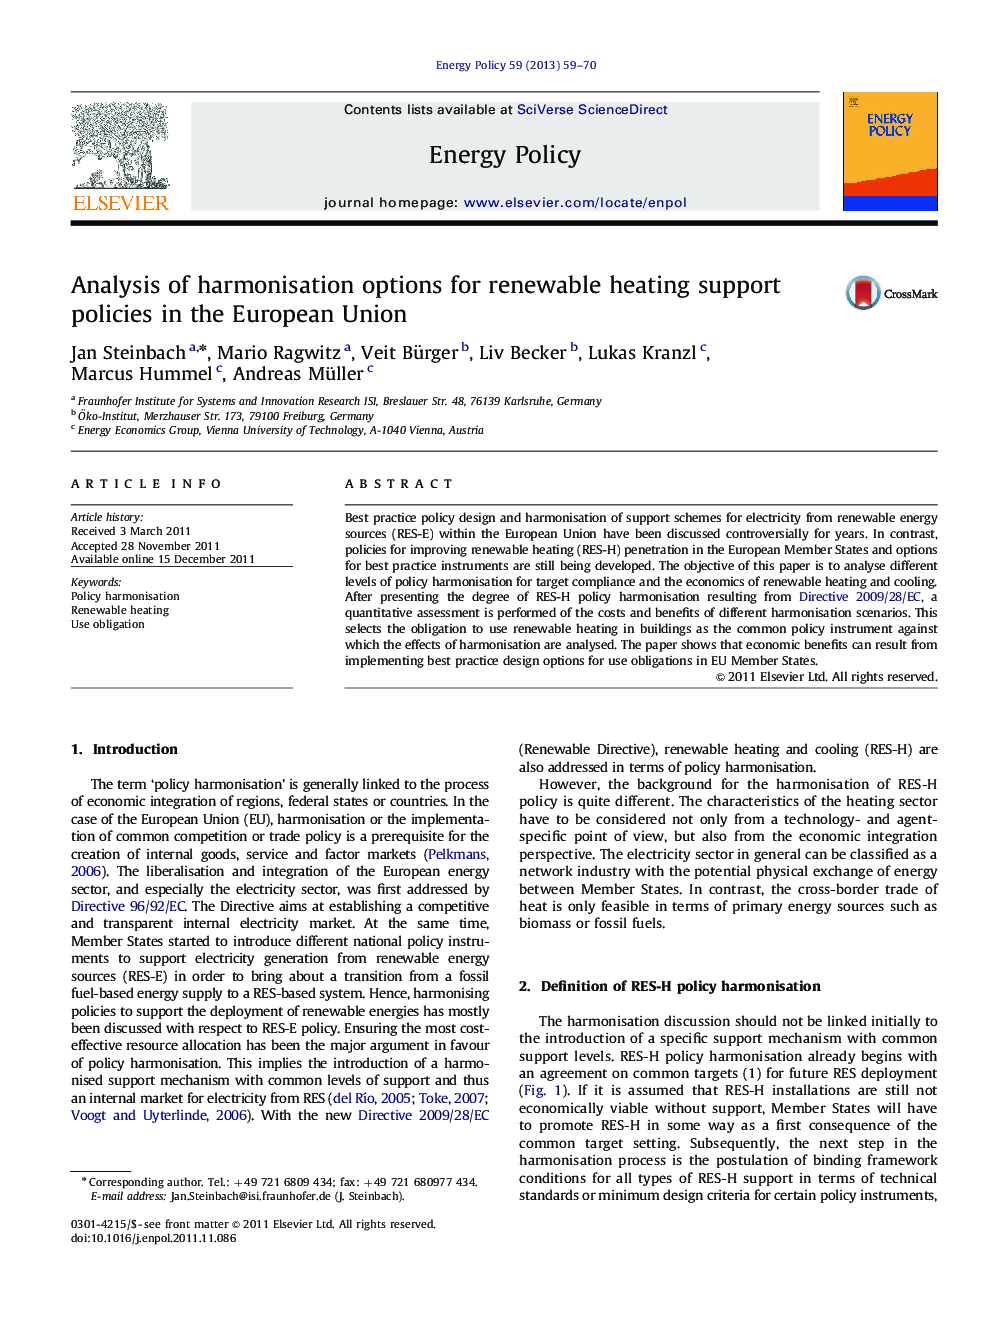 Analysis of harmonisation options for renewable heating support policies in the European Union